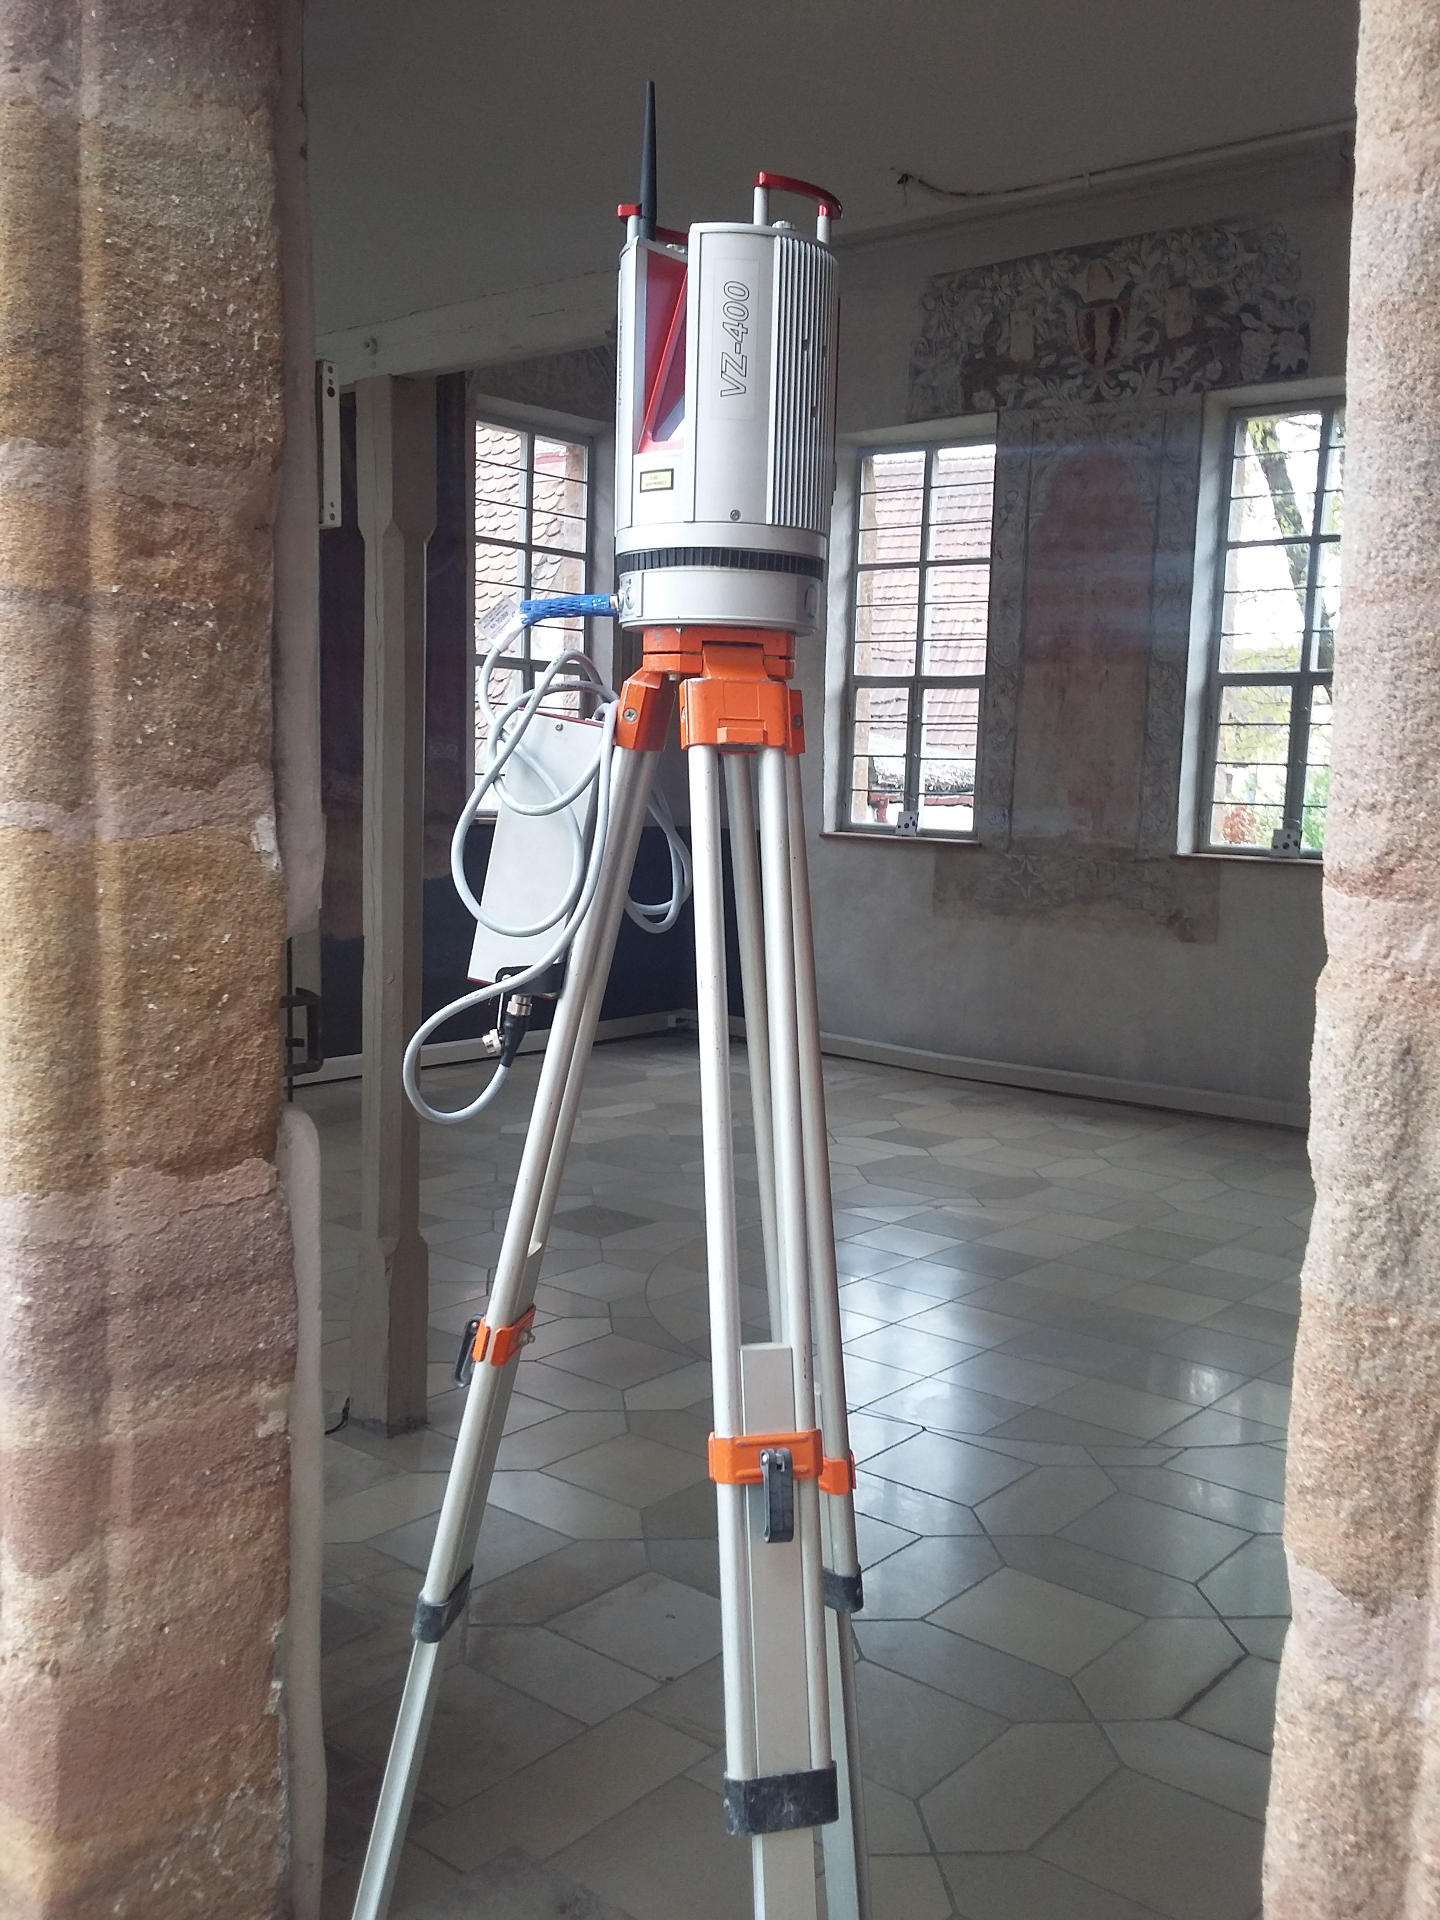 Surveying with a 3D laser scanner